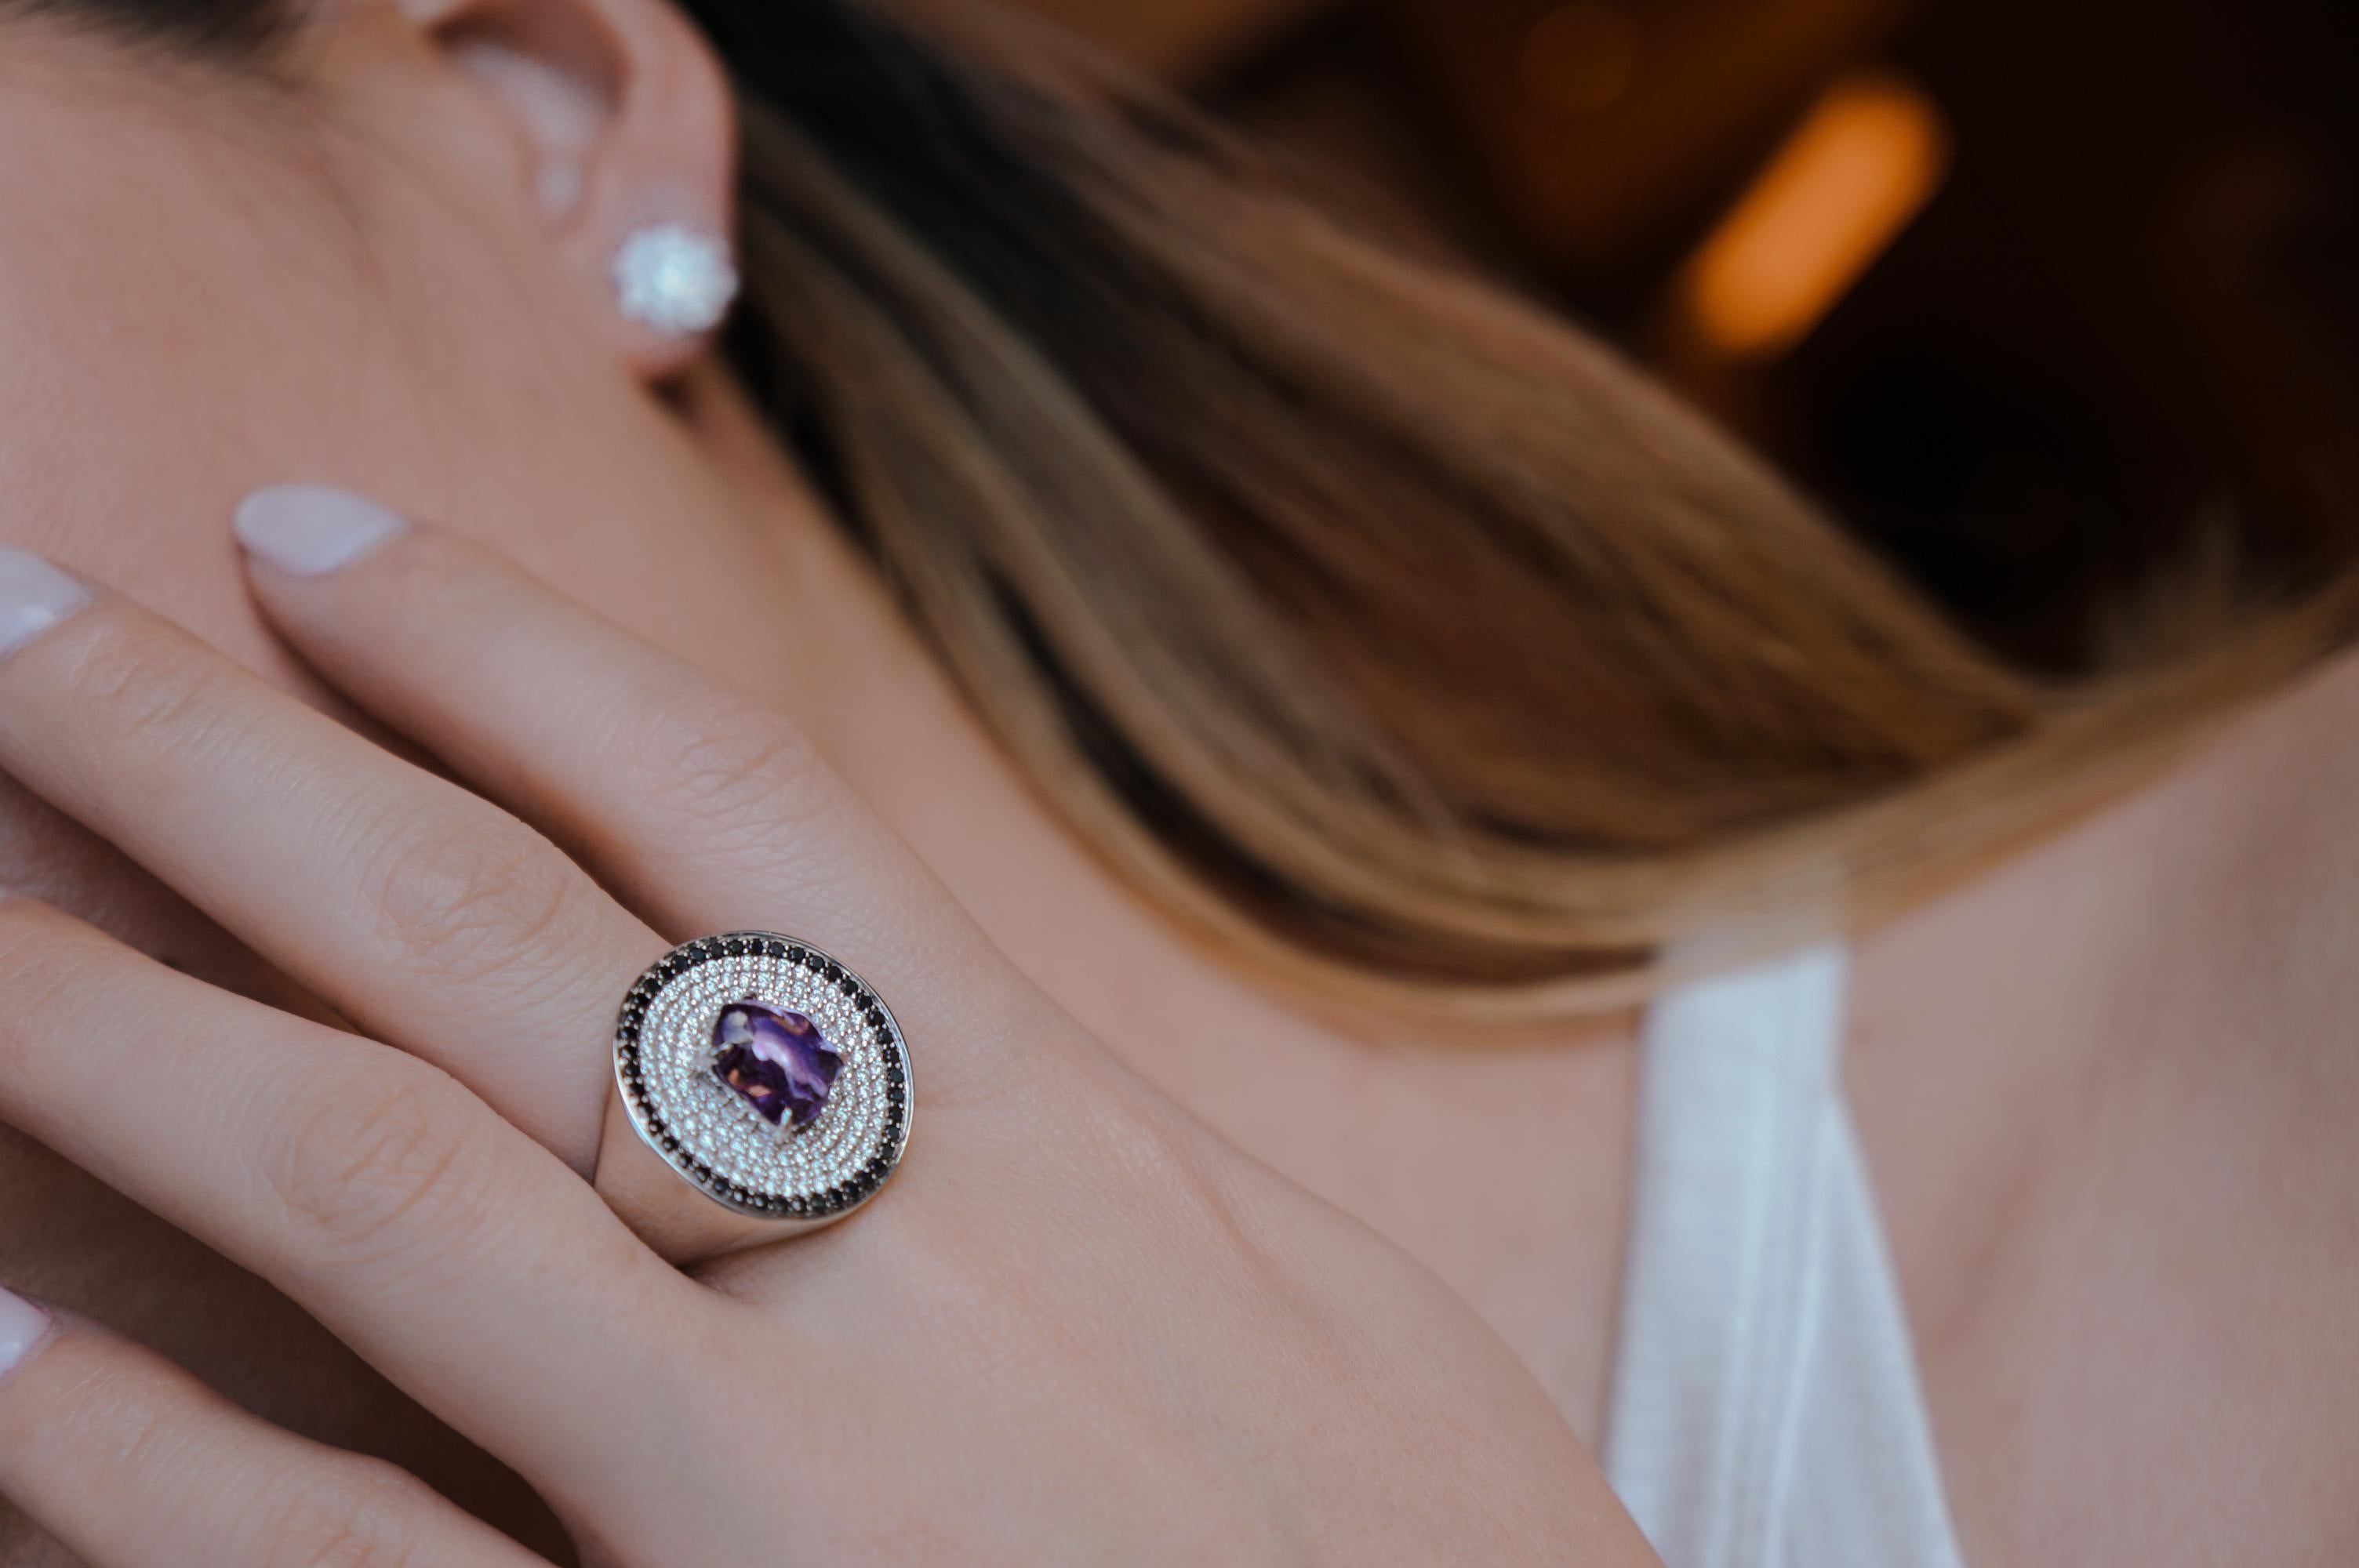 A pure circle, with concentric rings of black and white pave diamonds, creates a contrasting setting for a striking, organically shaped sapphire in Ri Noor's Disc Cocktail Ring with Purple Sapphire and Black and White Pave Diamonds. The unique